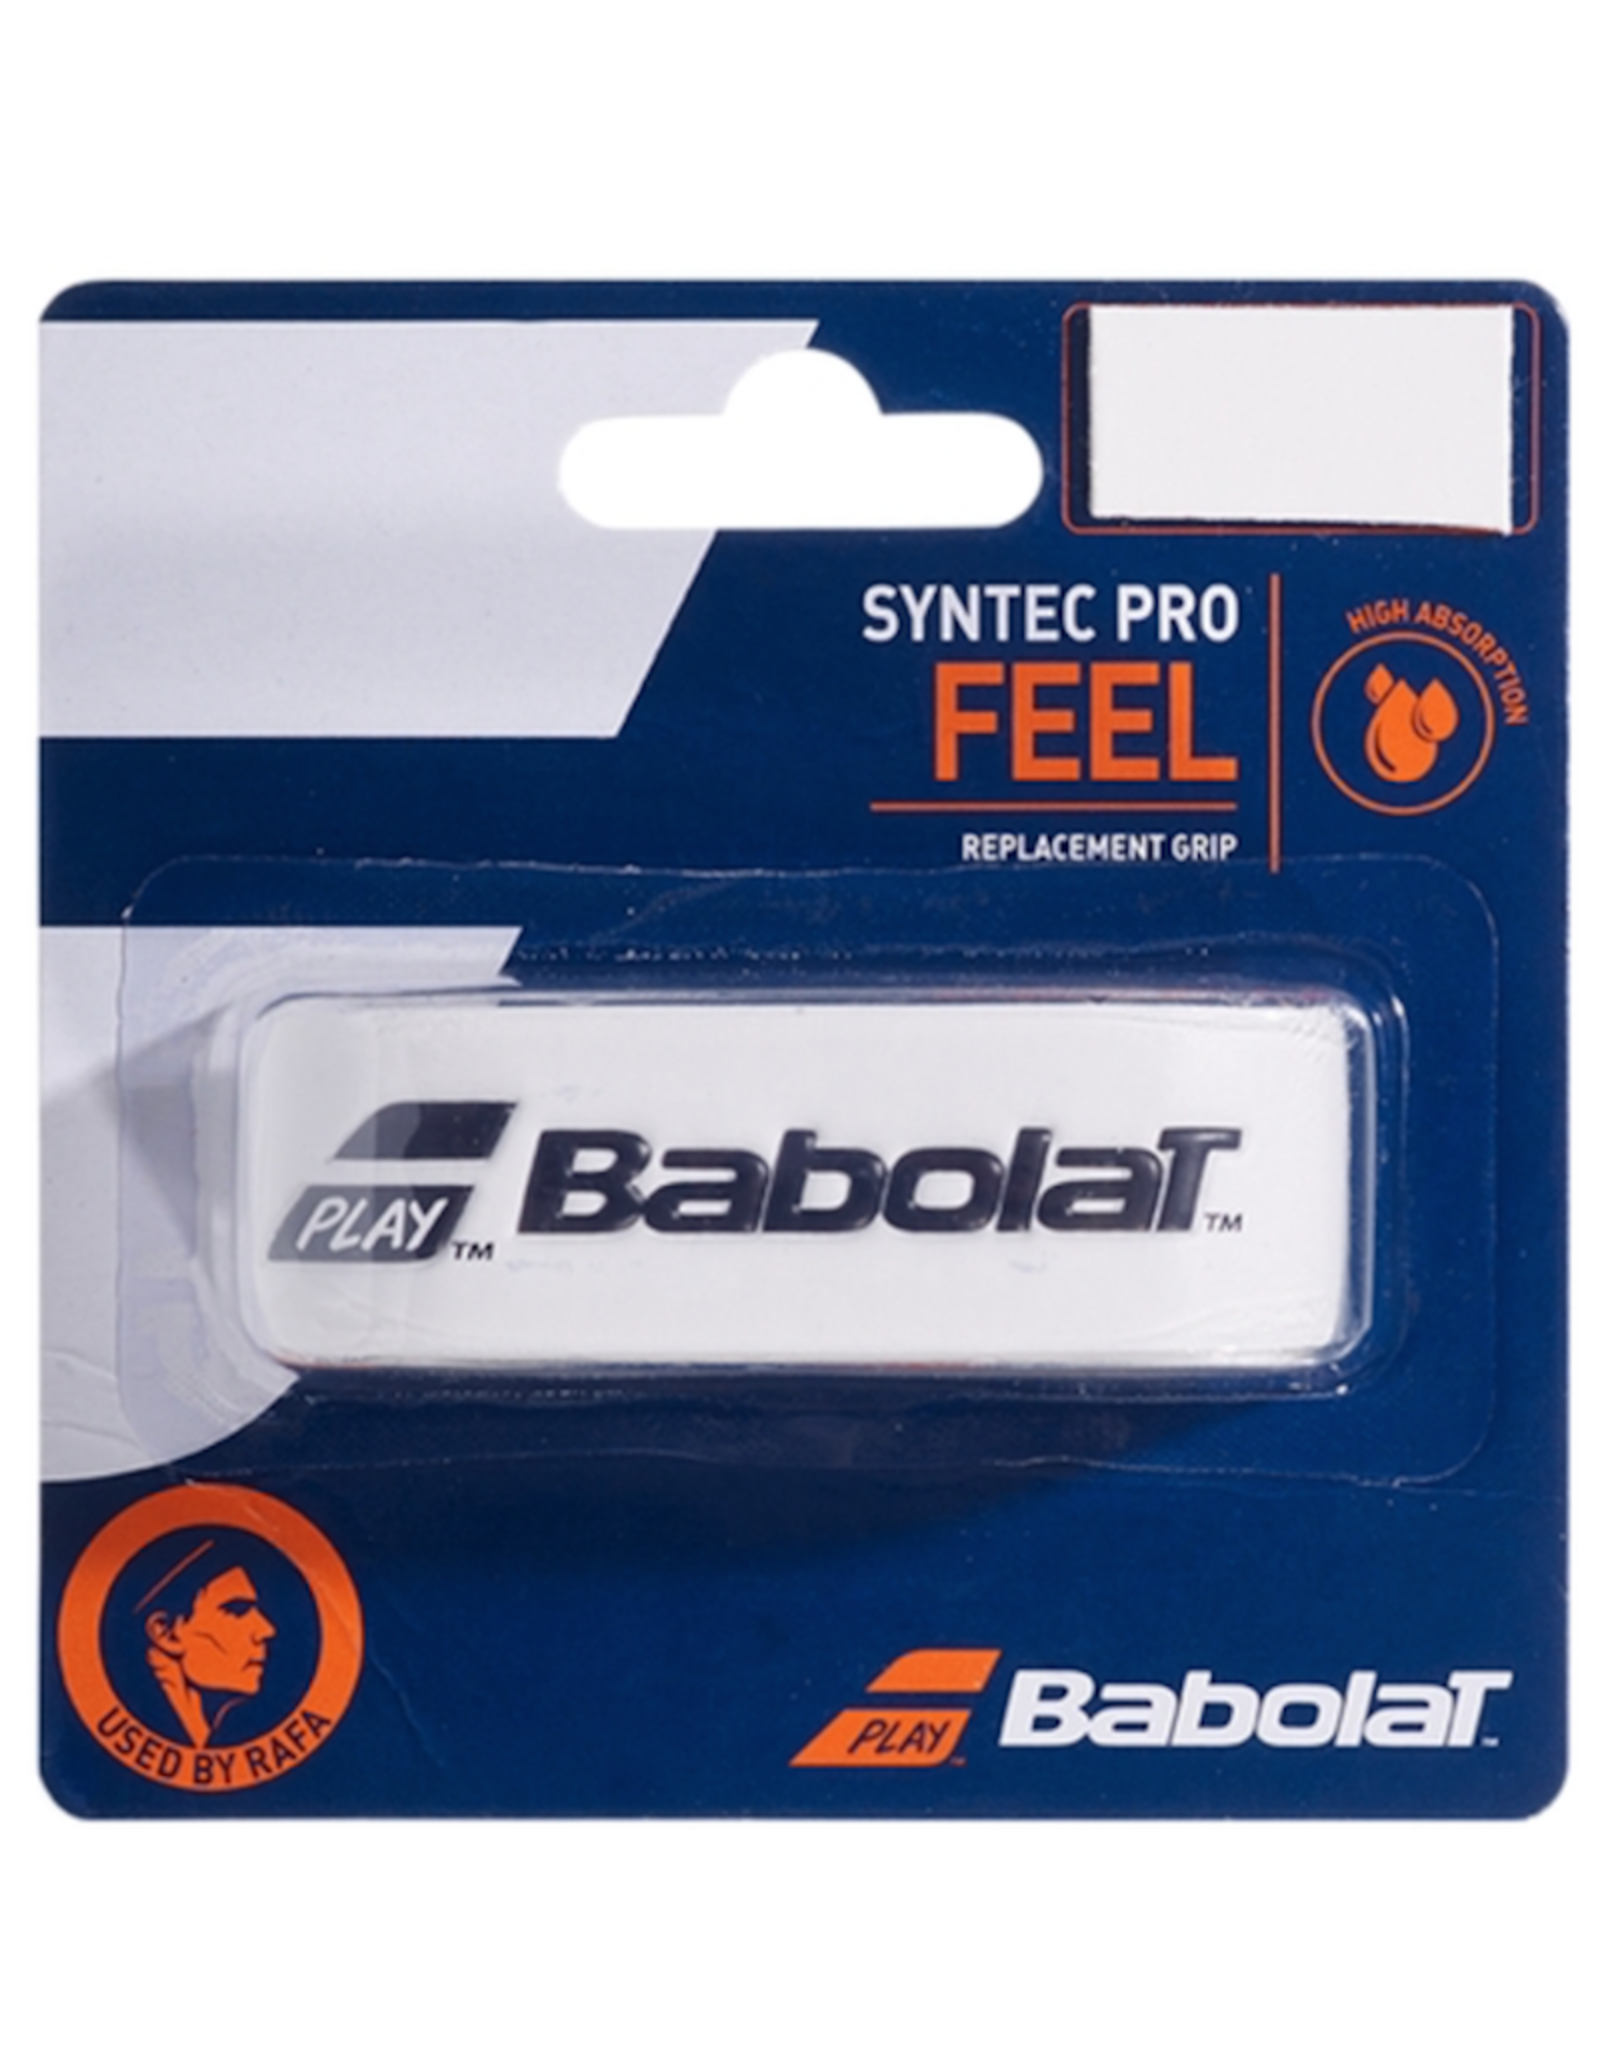 BABOLAT SYNTEC PRO REPLACEMENT GRIP WHITE